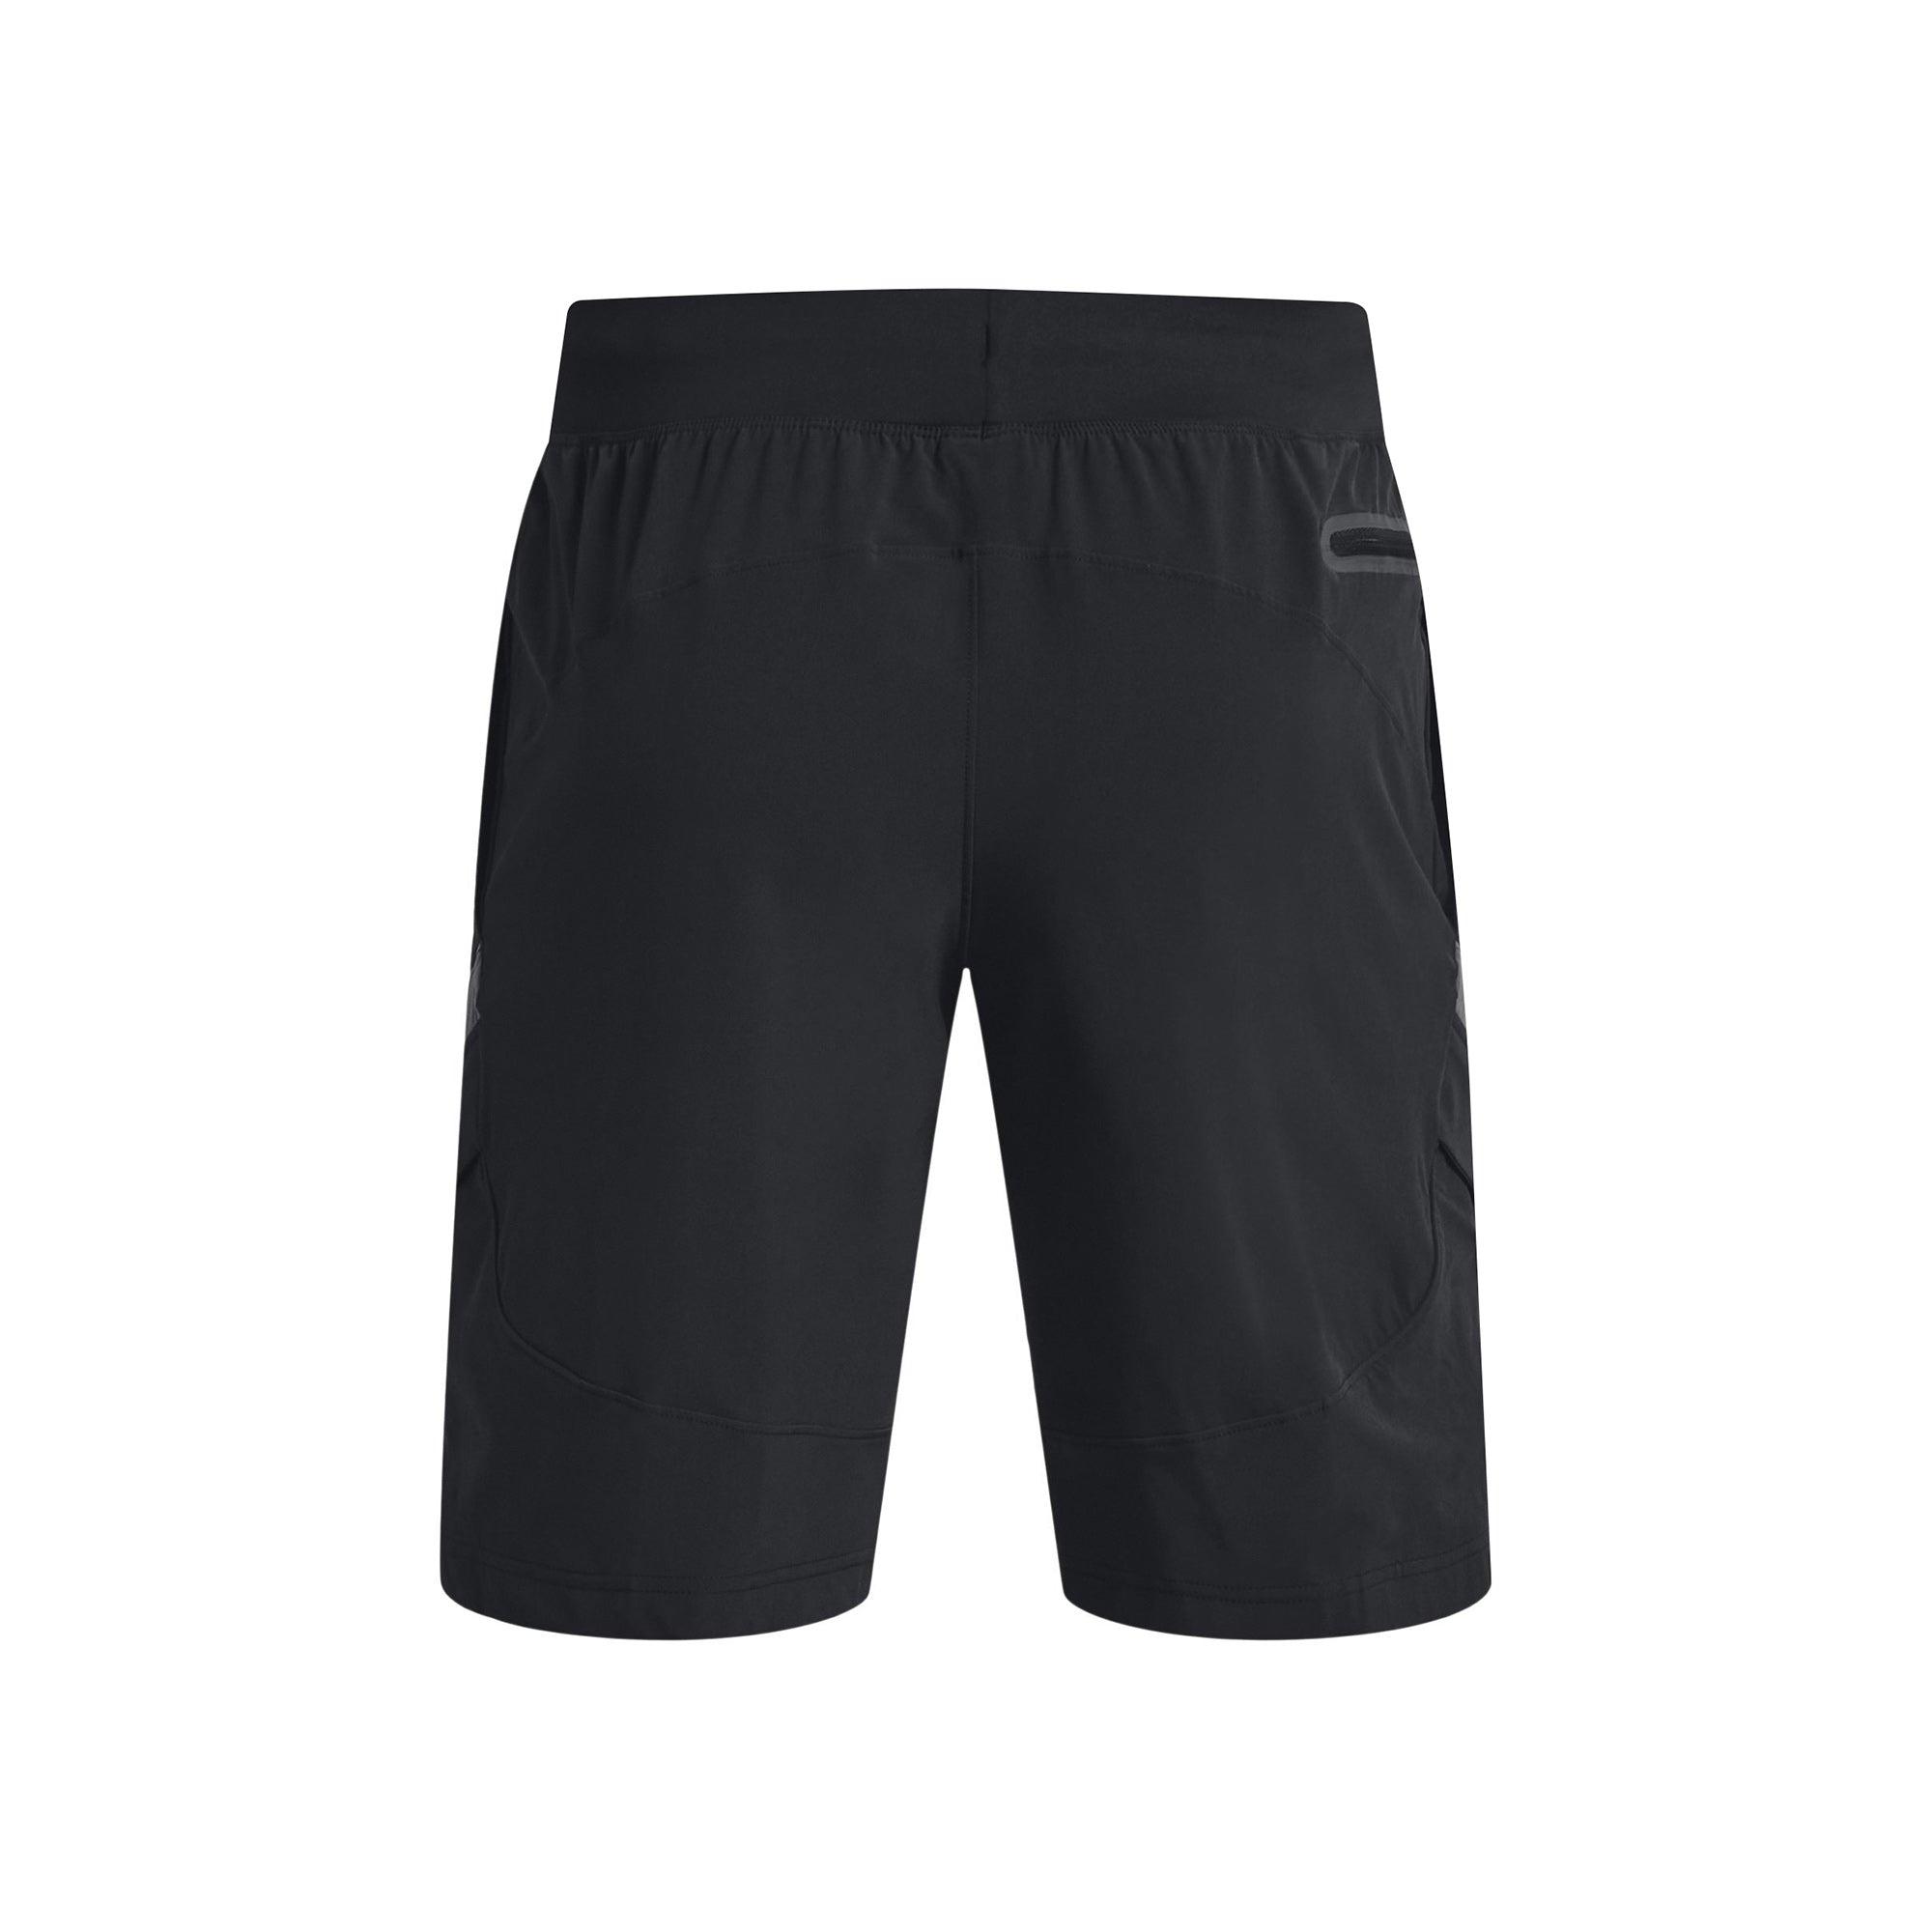 Quần ngắn thể thao nam Under Armour Pjt Rock Unstoppable - 1373573-001